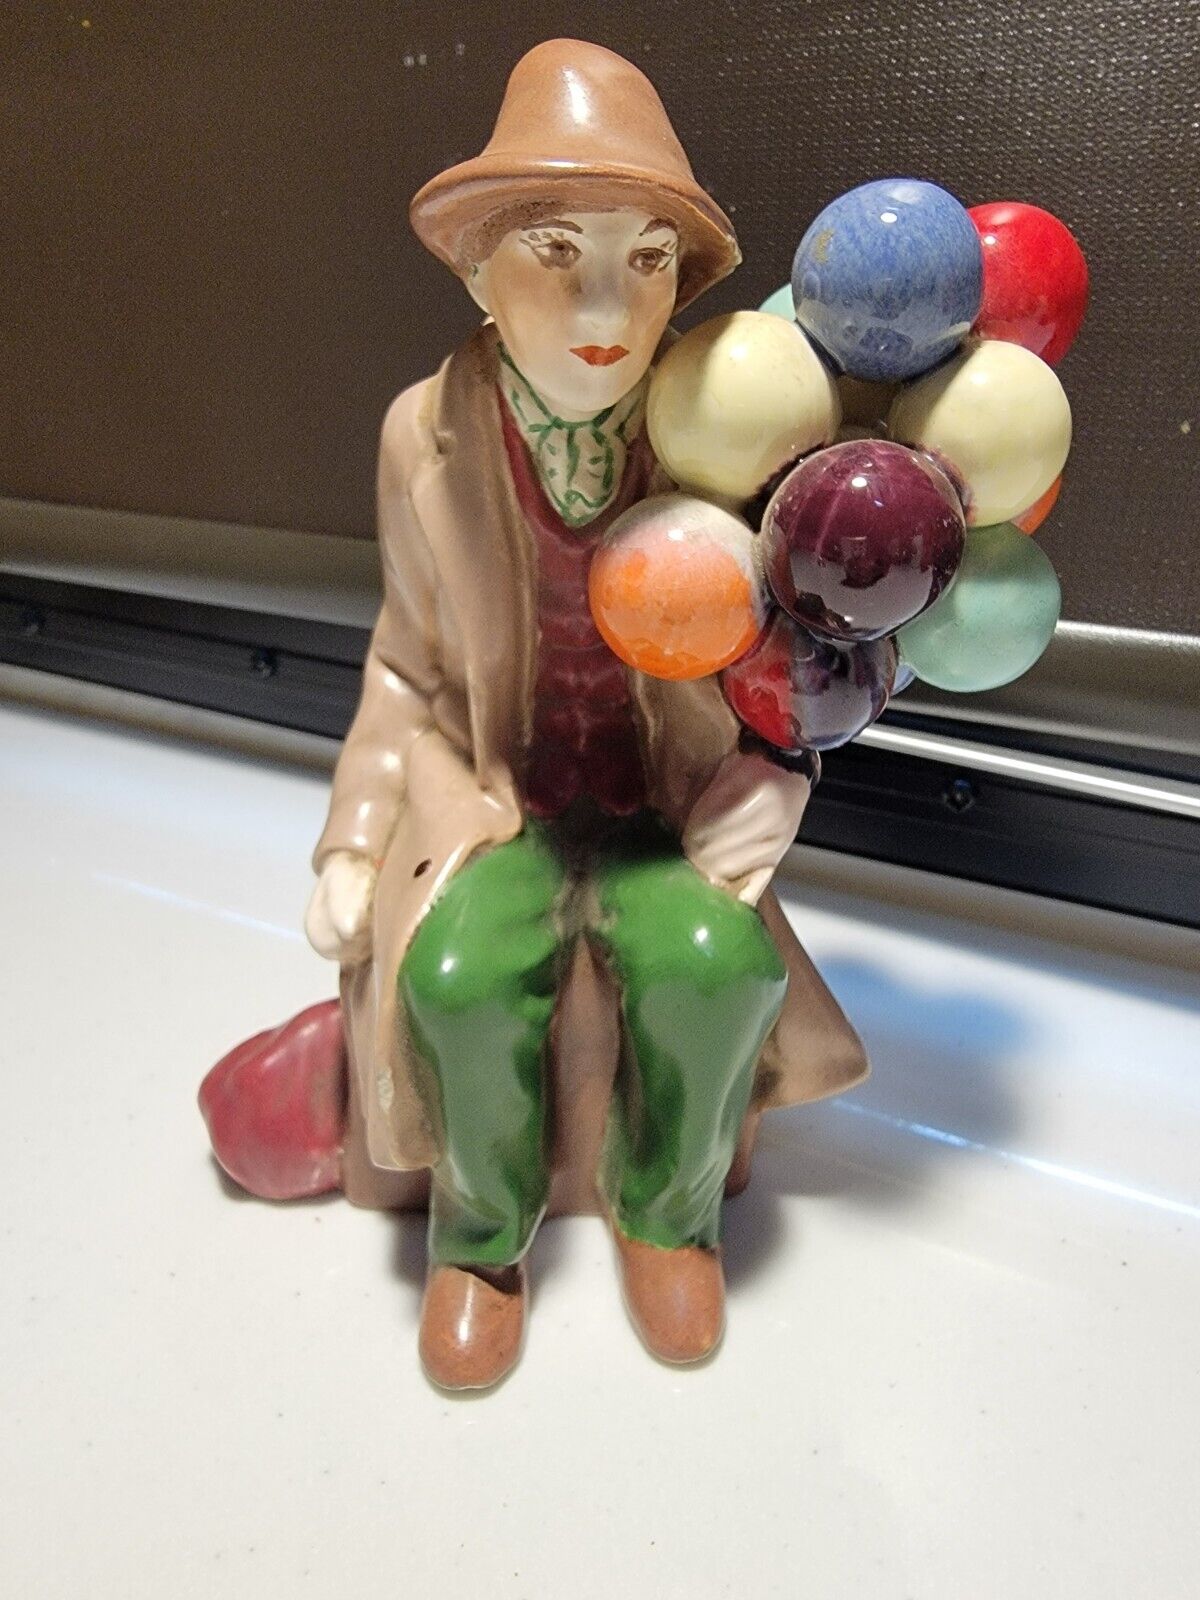 ROYAL DOULTON LIKE THE BALLOON MAN FIGURINE EXCELLENT CONDITION 